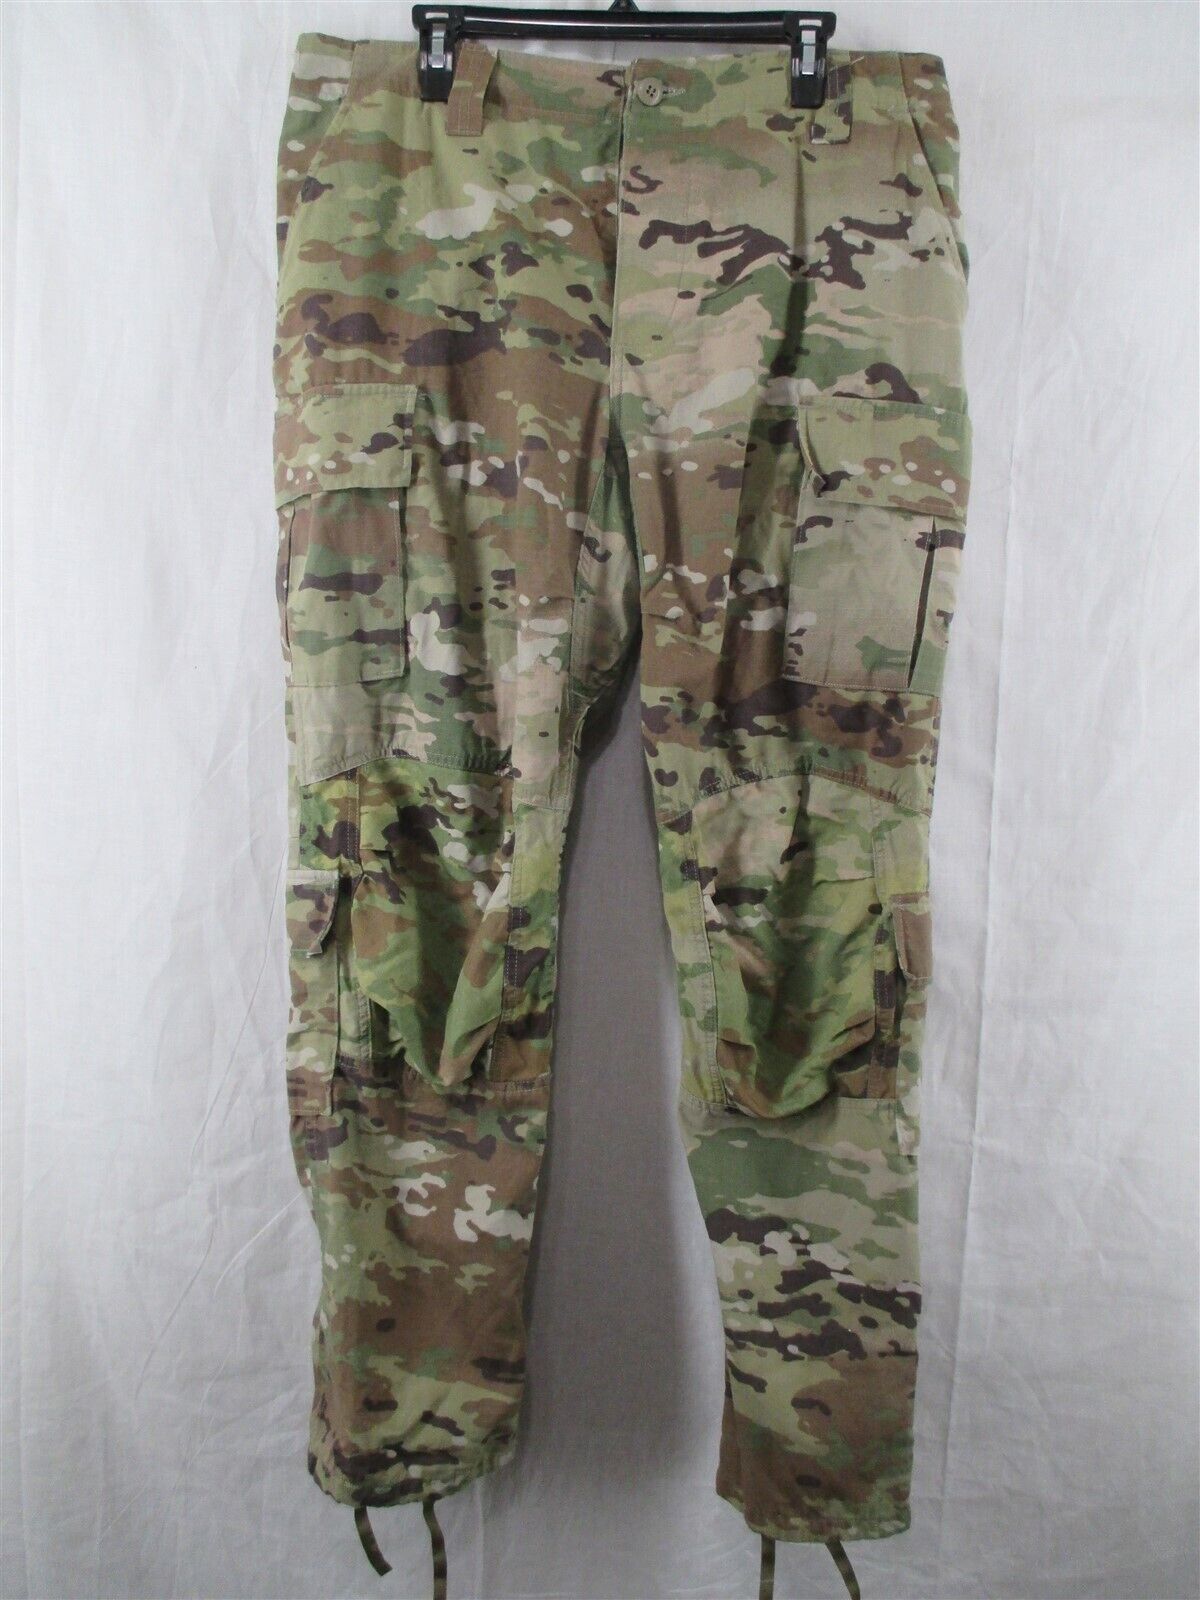 IHWCU Large Regular Pants/Trousers OCP Army Multicam Improved Hot Weather Combat